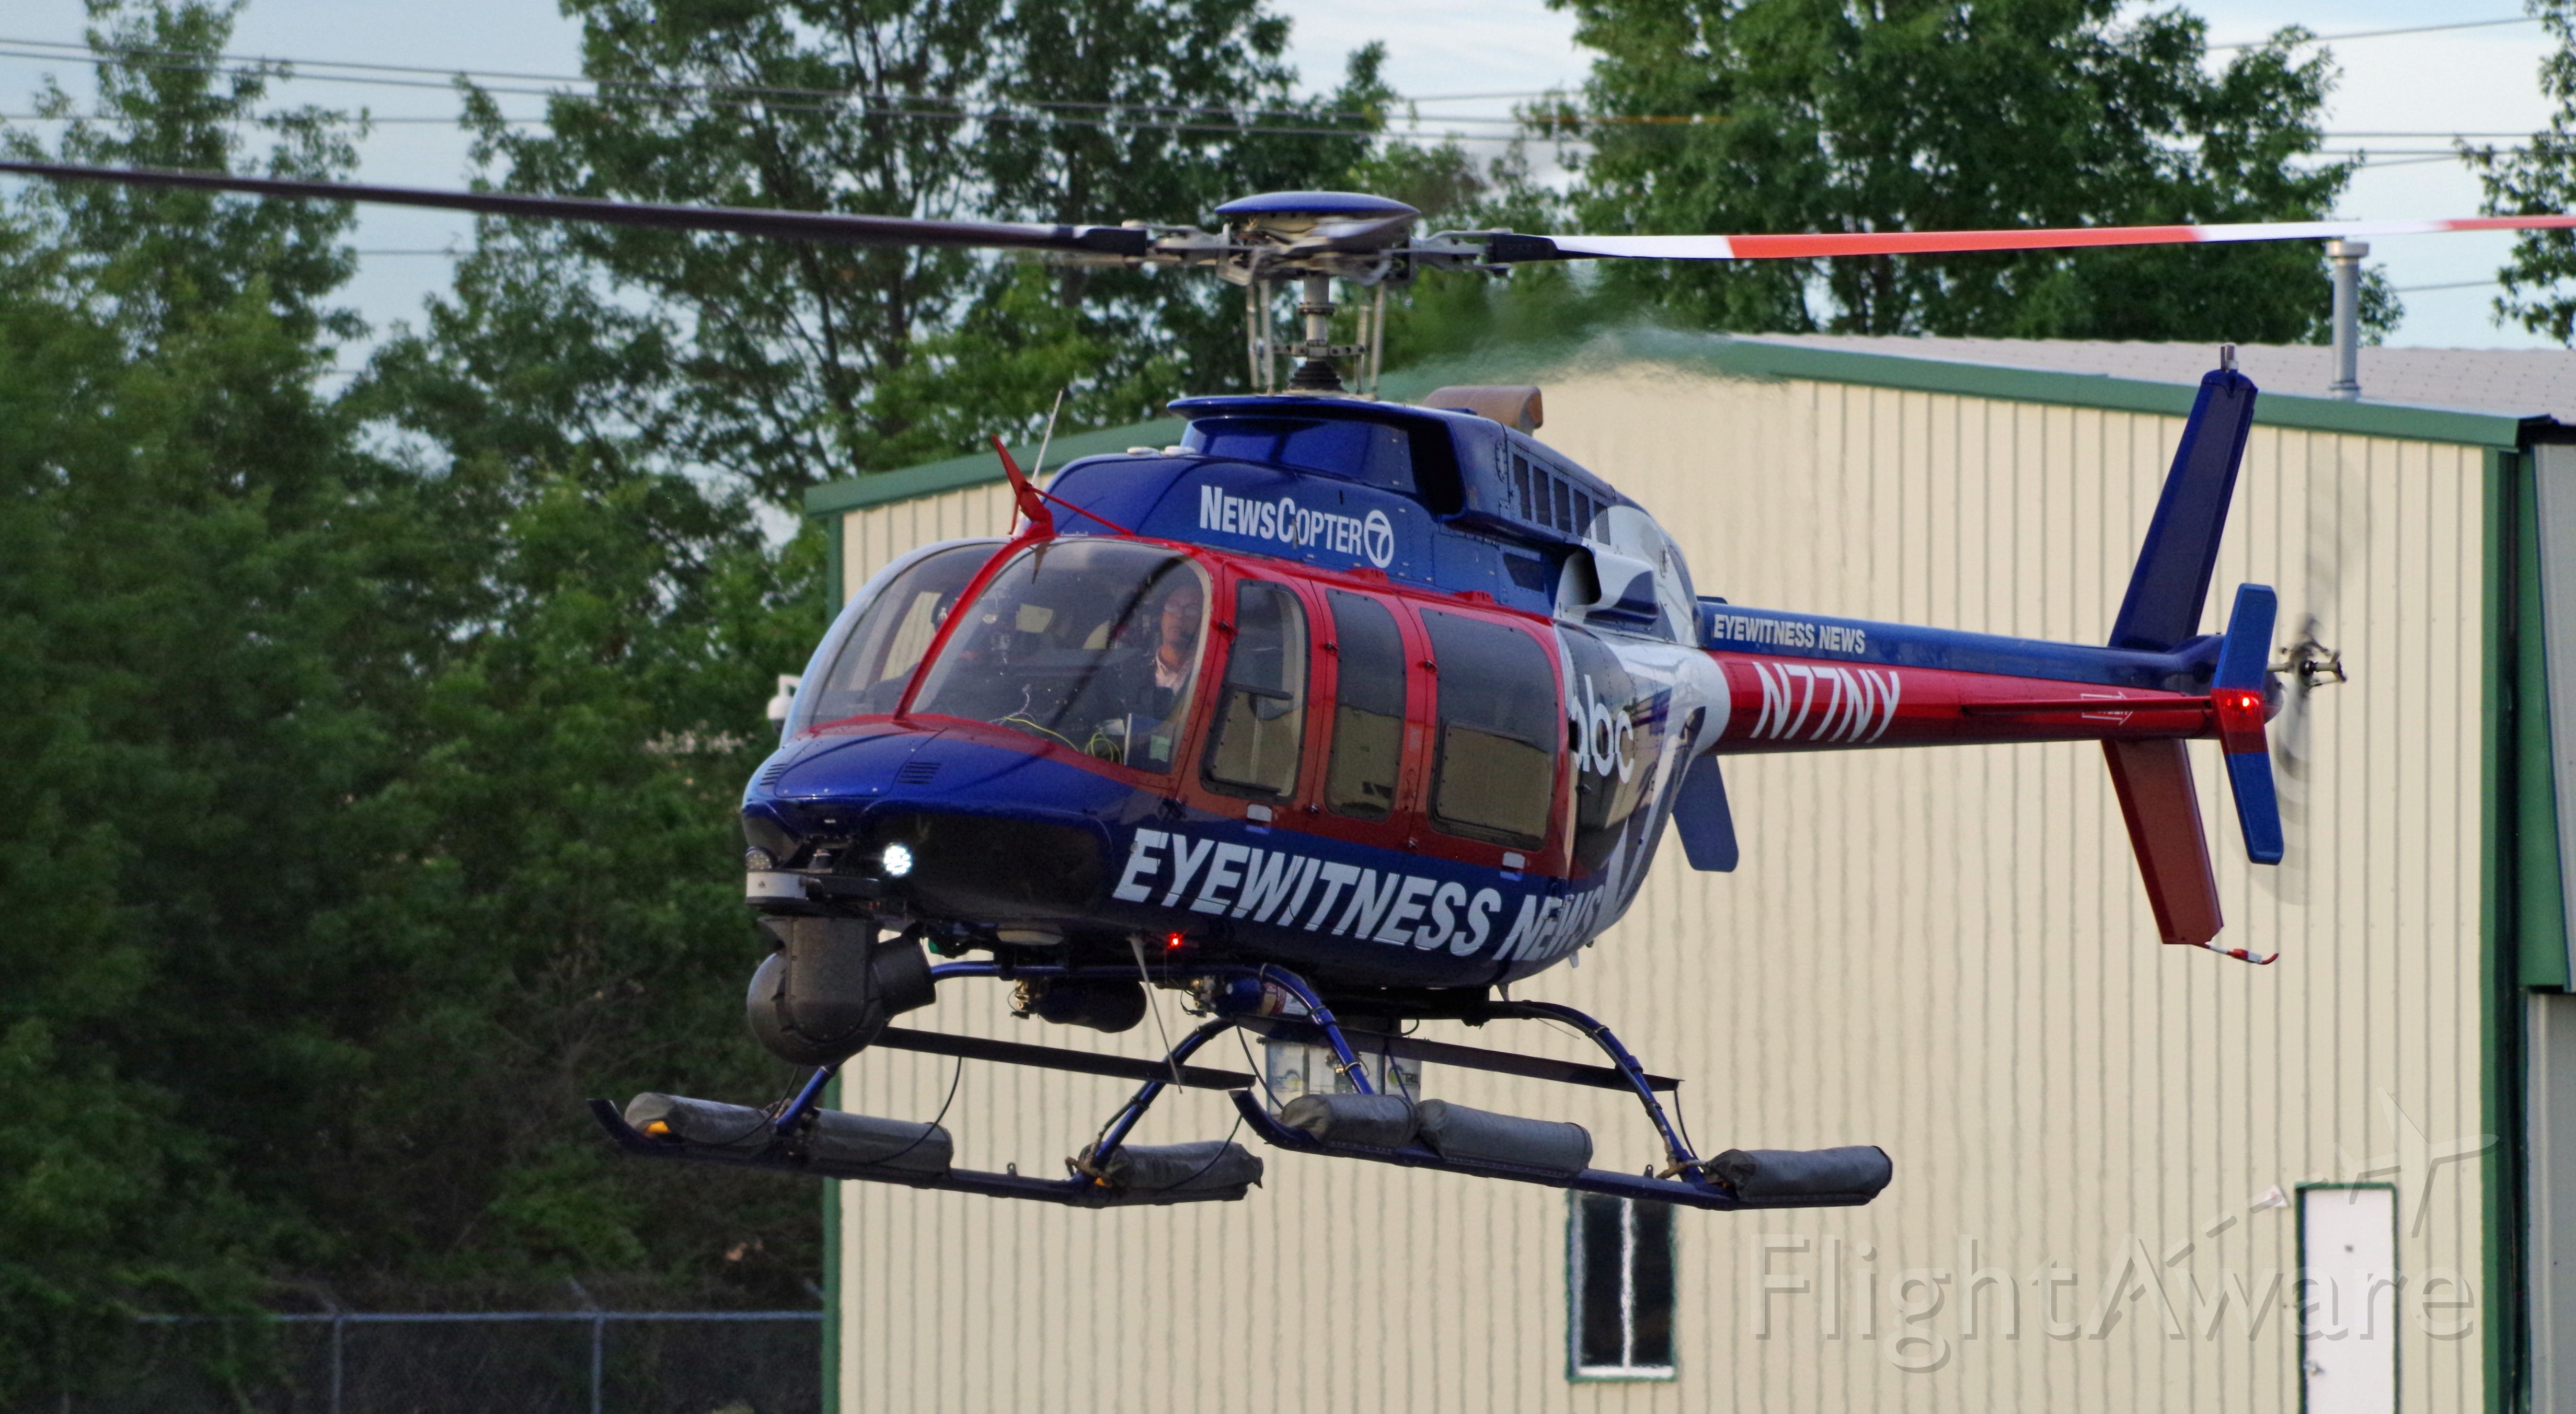 Bell 407 (N77NY) - LINDEN AIRPORT-LINDEN, NEW JERSEY, USA-AUGUST 31, 2020: A news helicopter from one of the local New York City television stations is seen preparing to land after completing its first flight of the morning.